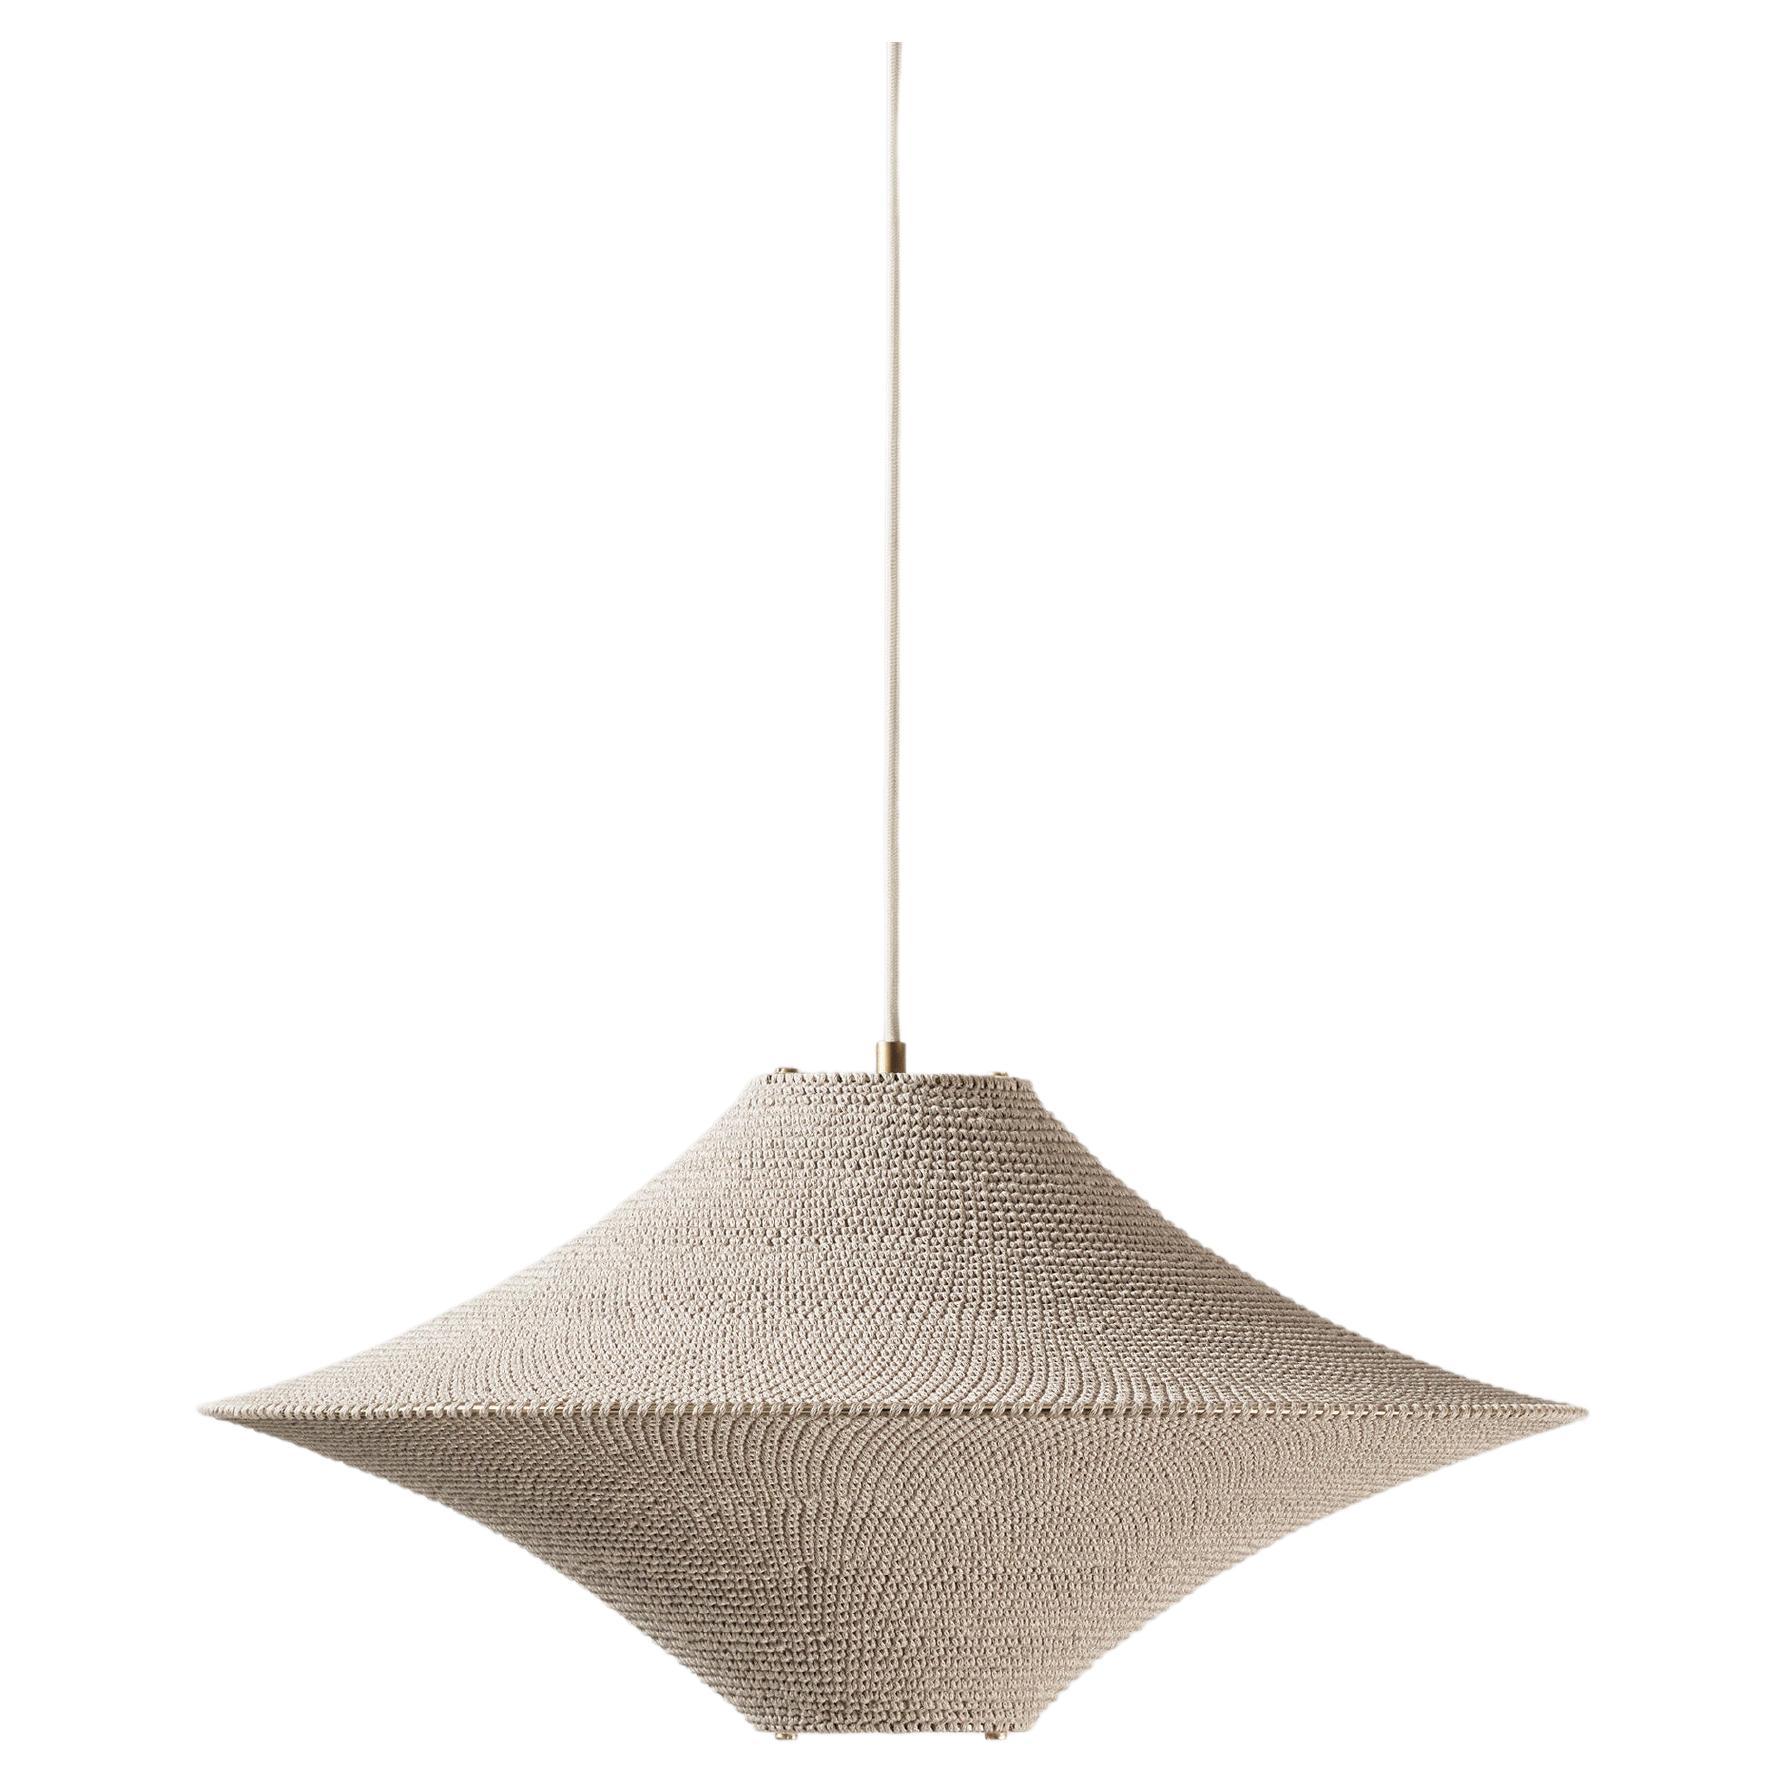 SOLITAIRE 01 Pendant Light Ø80cm/31.5in, Hand Crocheted in Egyptian Cotton